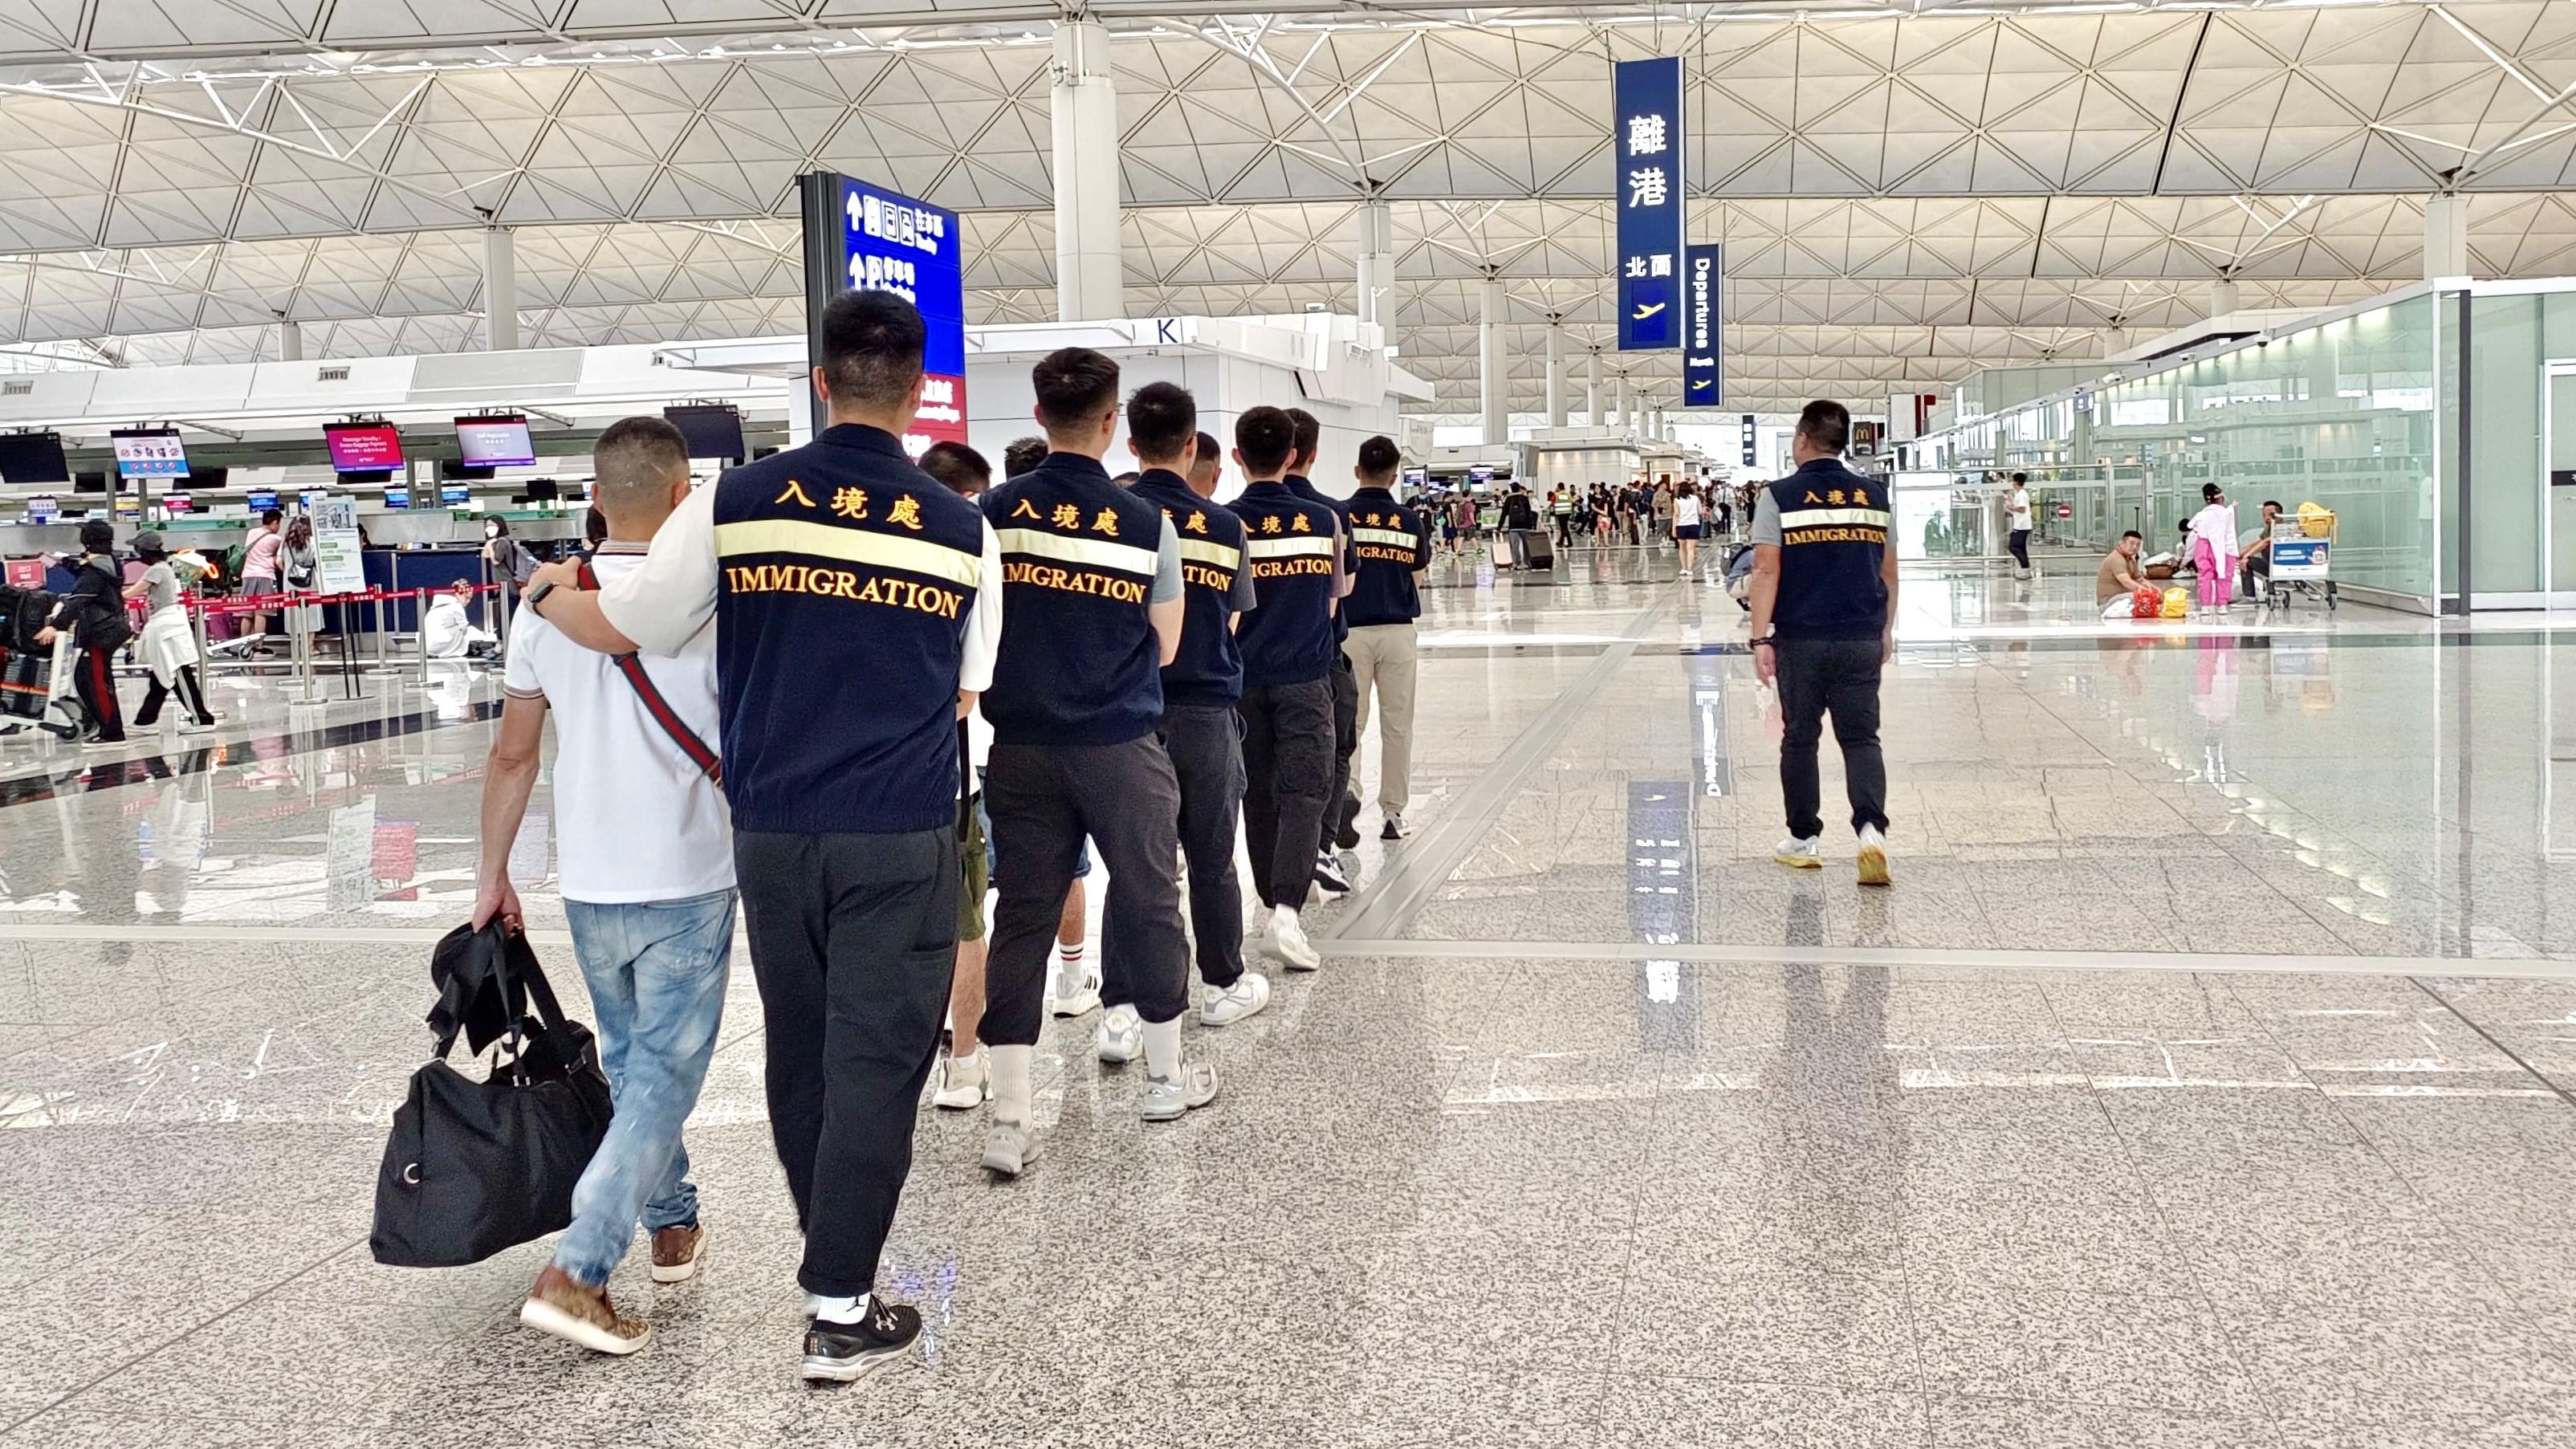 The Immigration Department (ImmD) carried out a repatriation operation today (August 25). A total of 30 Vietnamese illegal immigrants were repatriated to Vietnam. Photo shows removees being escorted by ImmD officers to depart from Hong Kong.